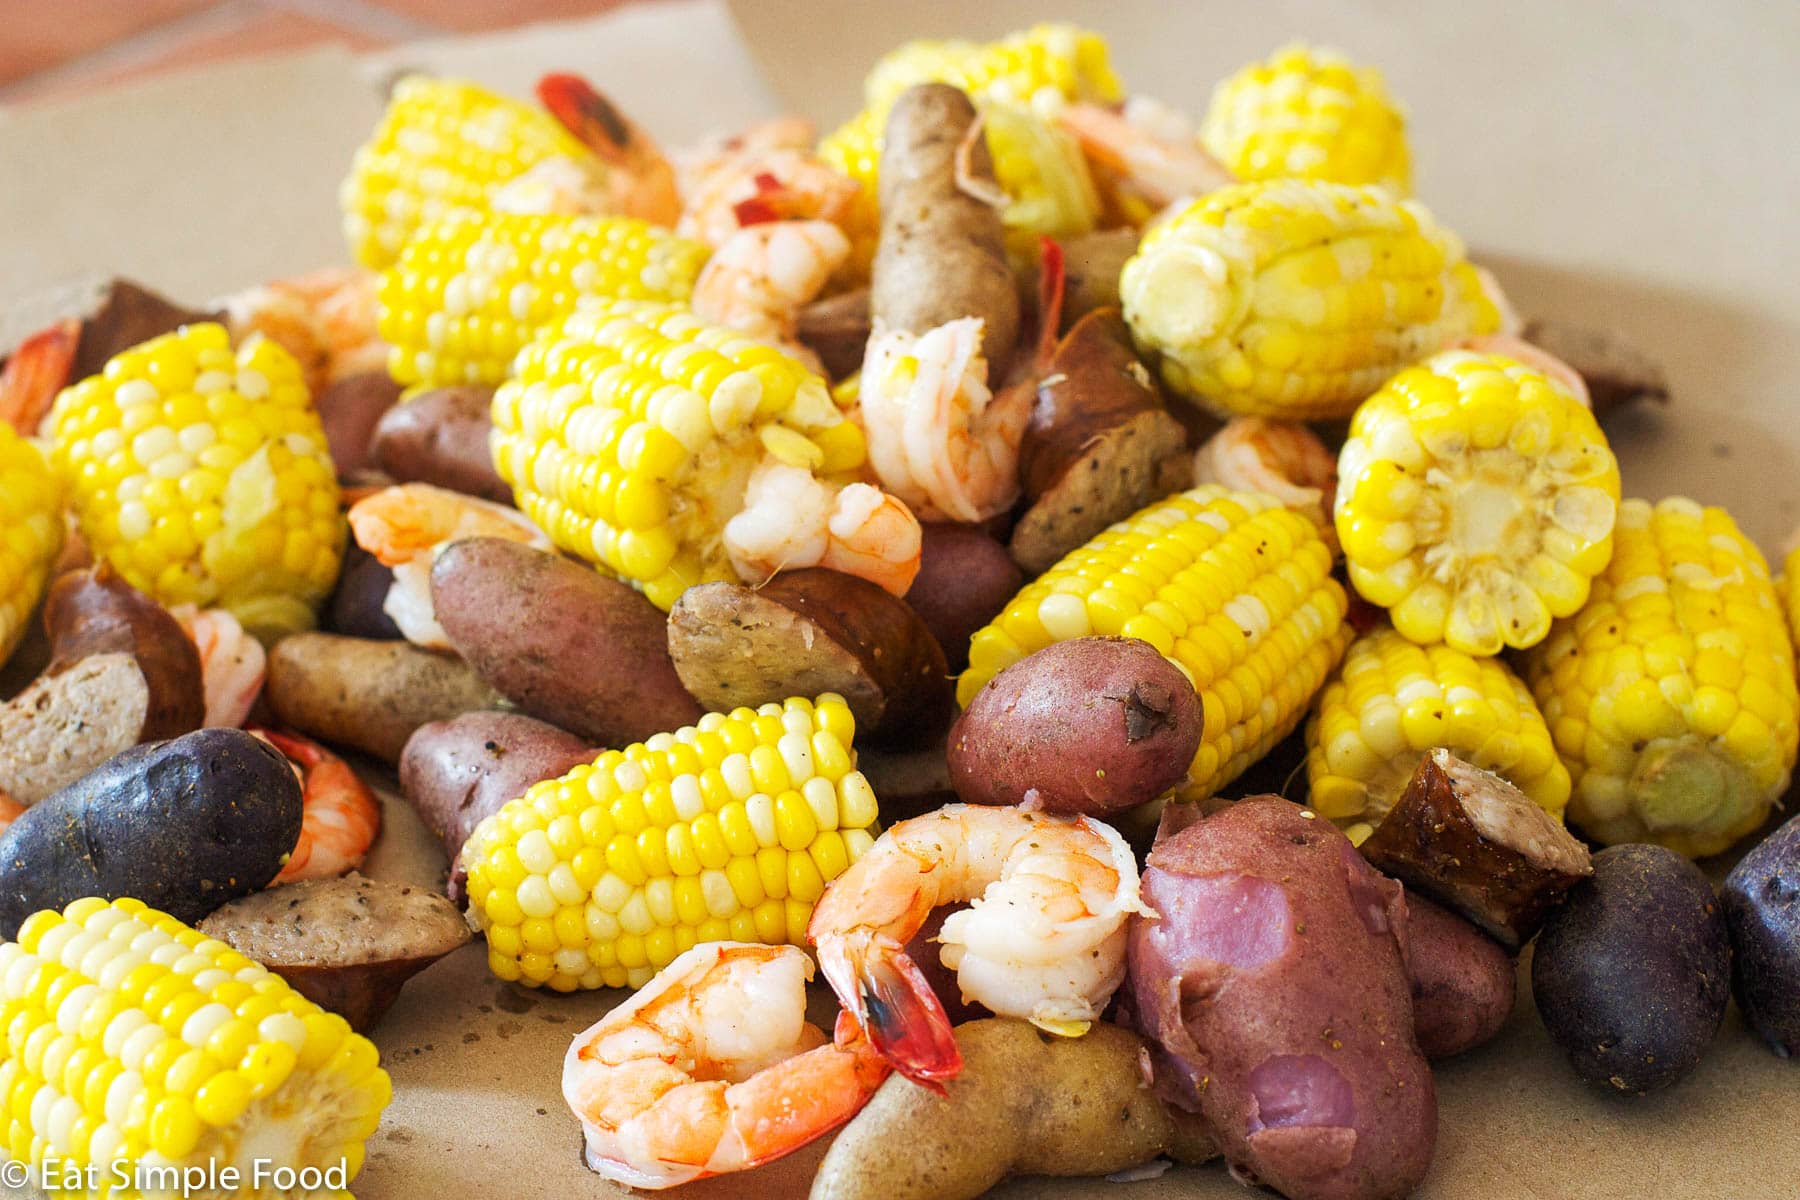 Small Potatoes, Shrimp, Sliced Andouille Sausage, Corn cooked and laid out on craft brown paper.